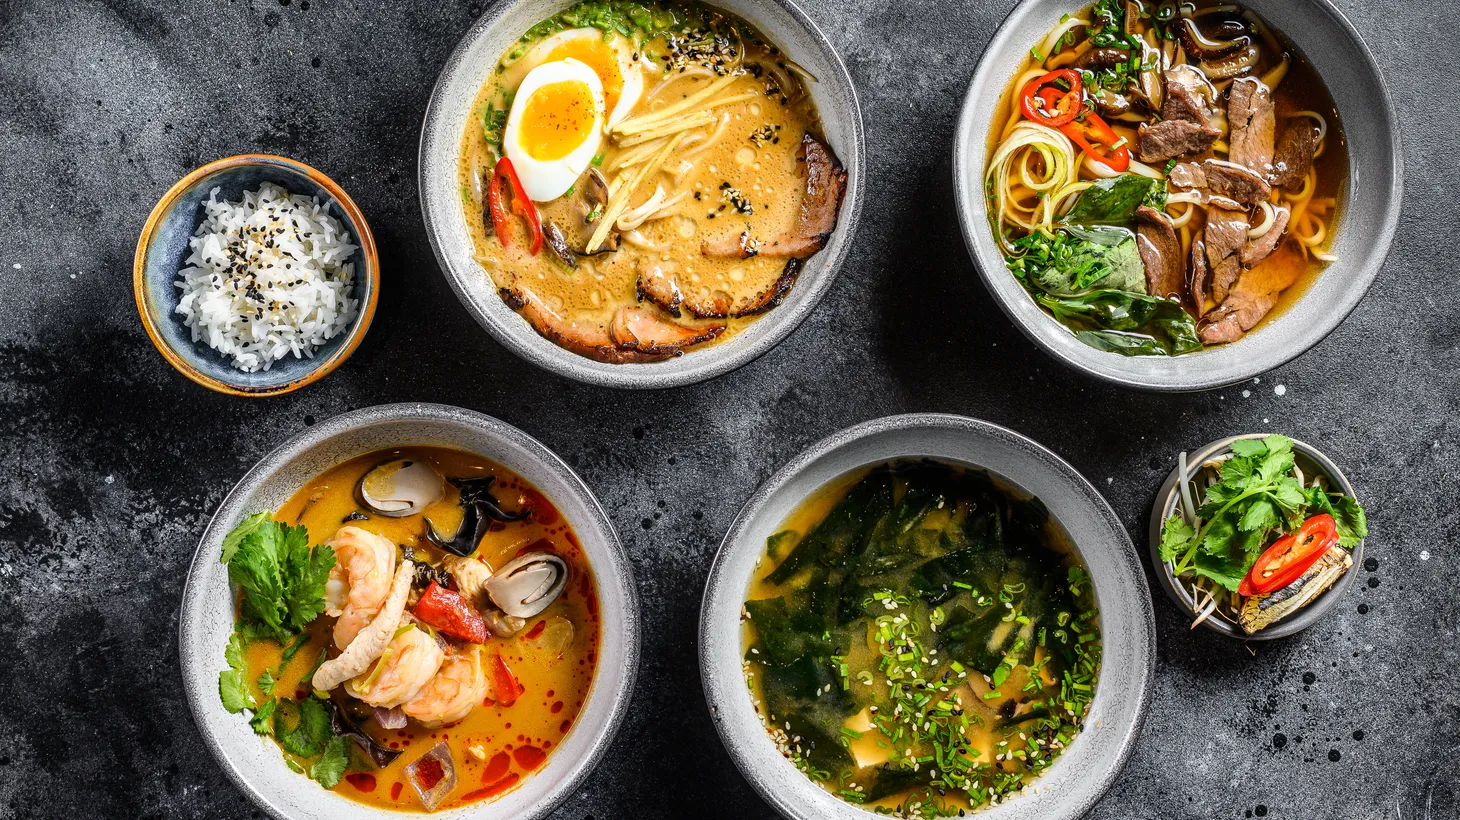 Miso, ramen, tom yam, beef pho are displayed on a table.